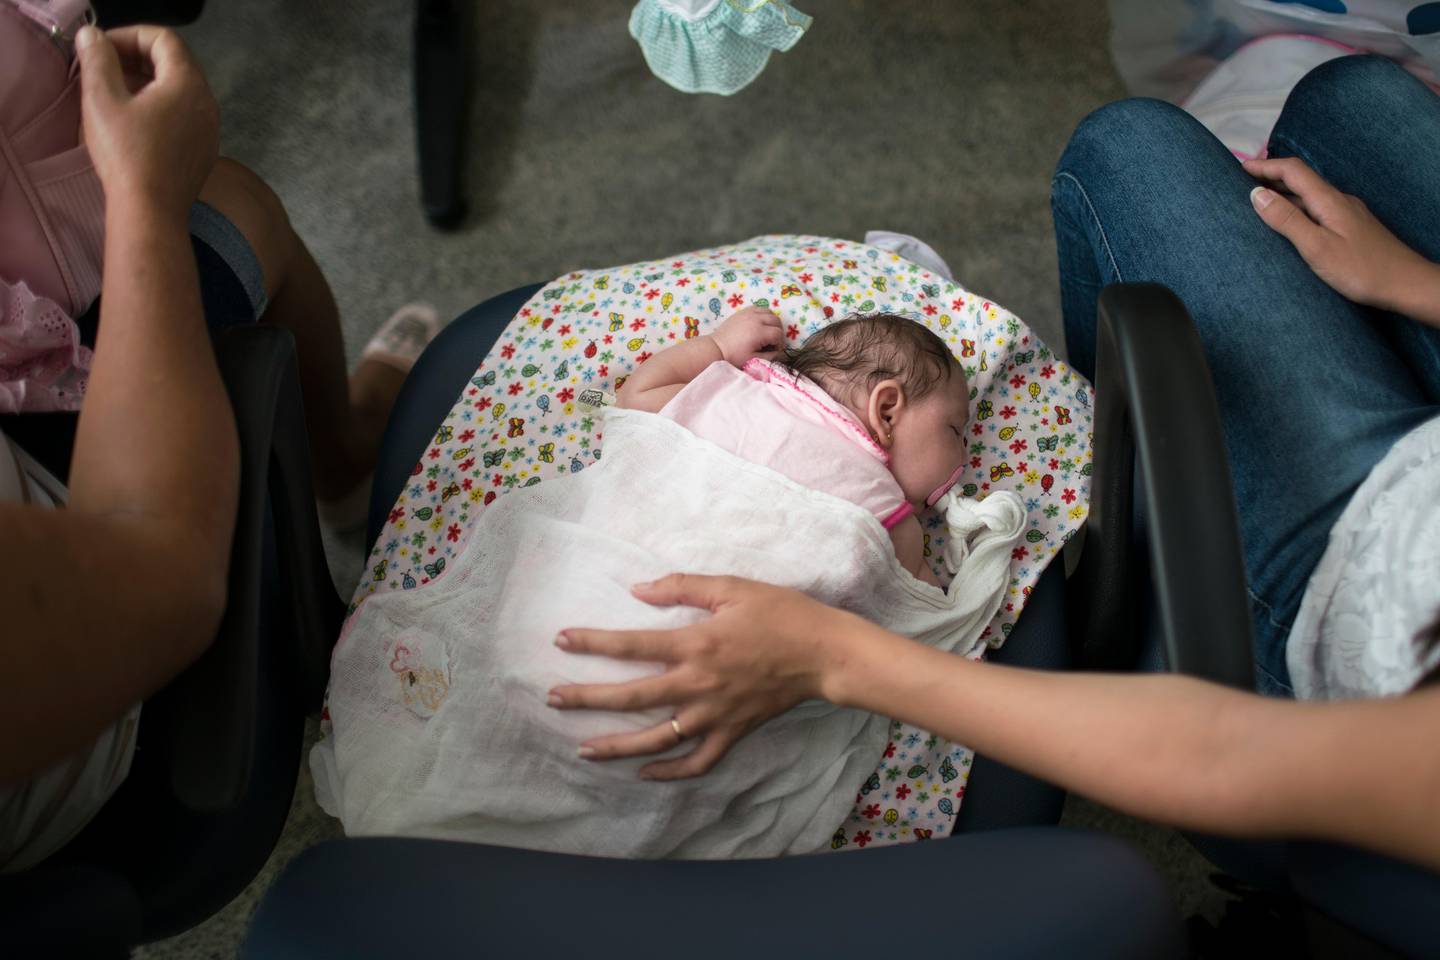 FILE - In this Dec. 22, 2015 file photo, Angelica Pereira, right, holds her daughter Luiza, disabled by the Zika syndrome, as she waits for their appointment with a neurologist at the Mestre Vitalino Hospital in Caruaru, Pernambuco state, Brazil. Treating children with neurological problems is not cheap. Researchers exploring the health burden for governments fighting Zika conclude that each child with microcephaly in Brazil would cost about $95,000 in lifetime medical expenses. (AP Photo/Felipe Dana, File)